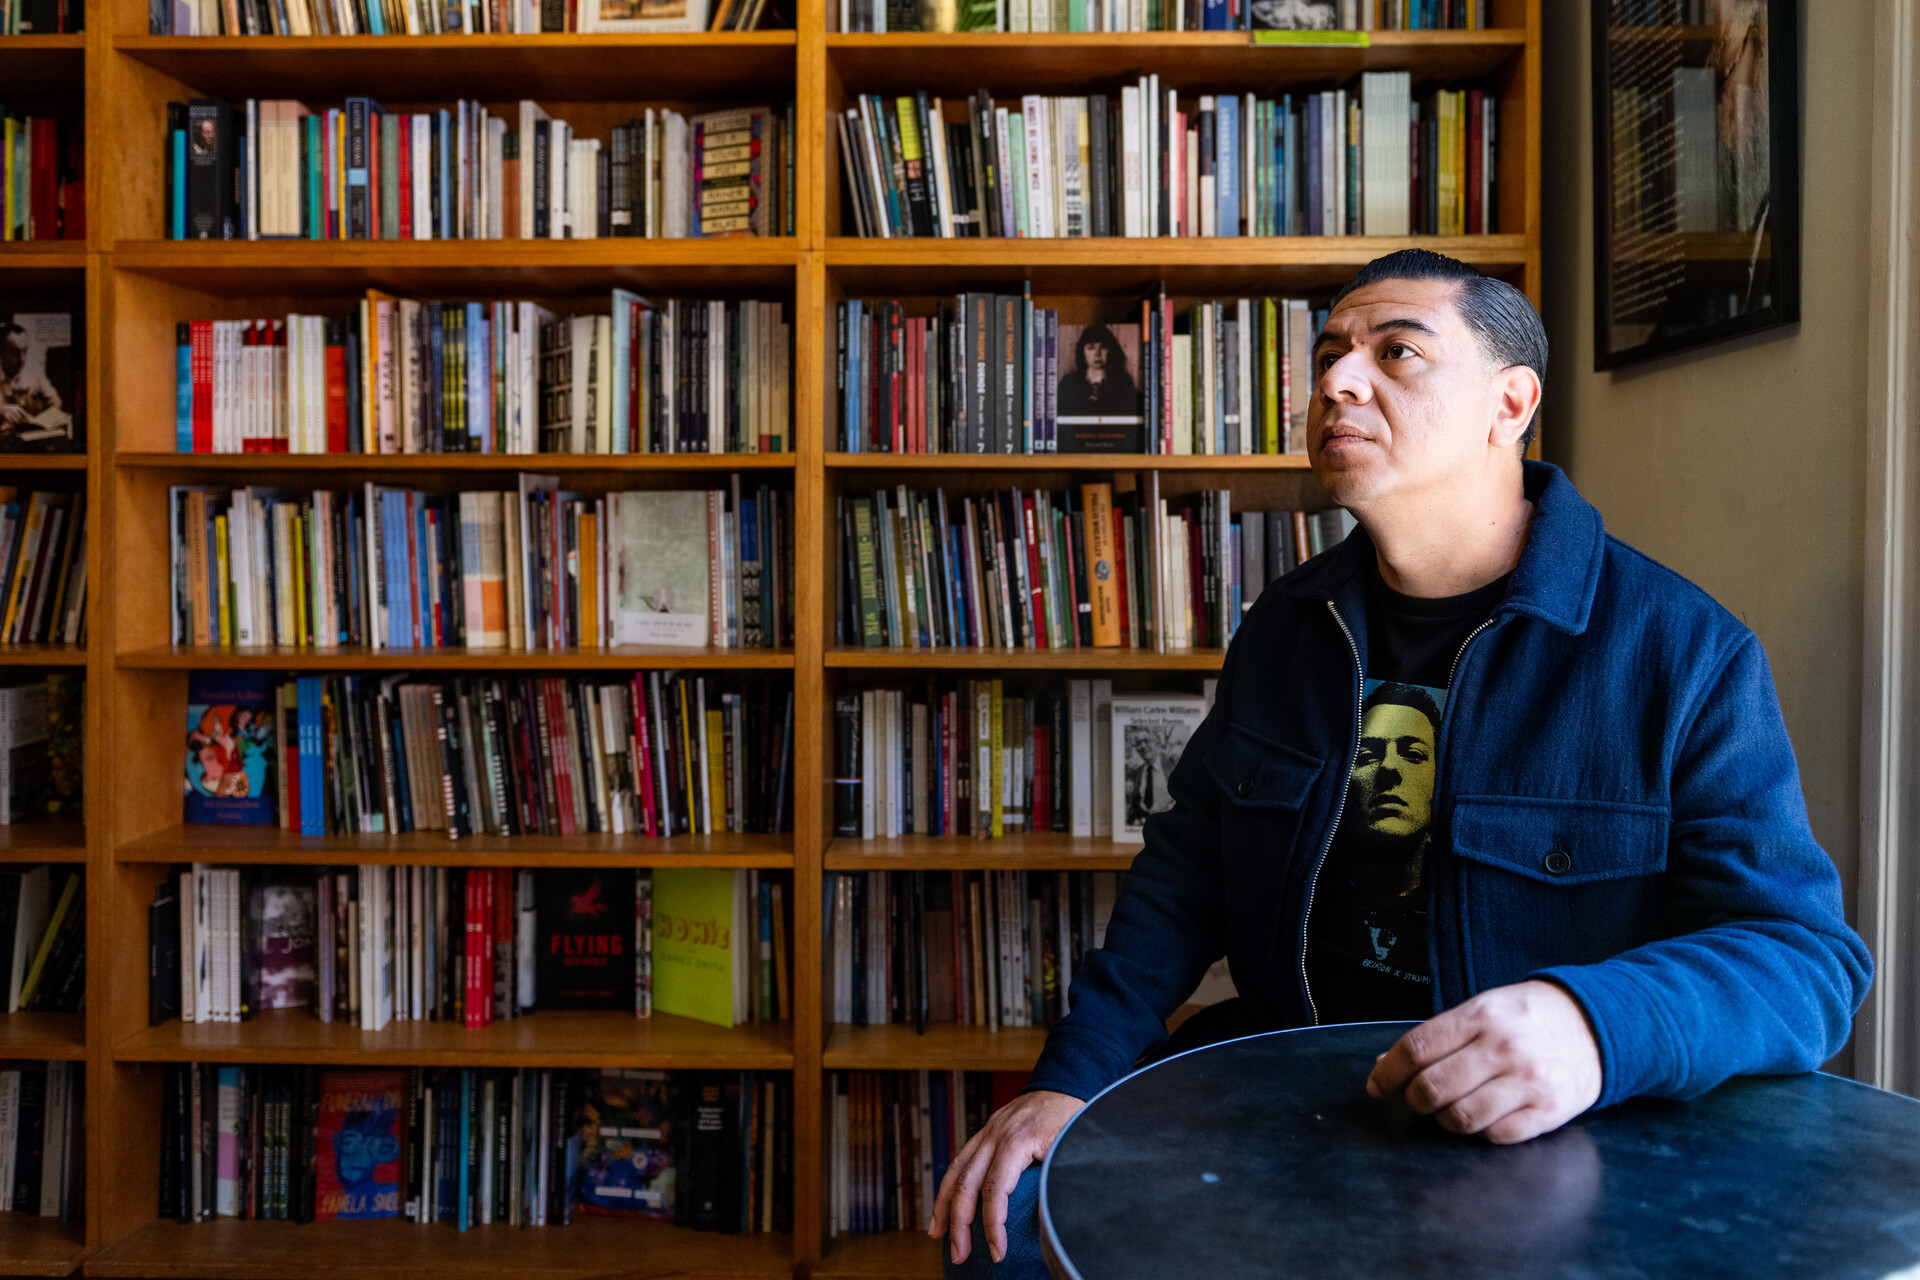 A man in a blue jacket sits inside a bookstore with a full bookshelf behind him.